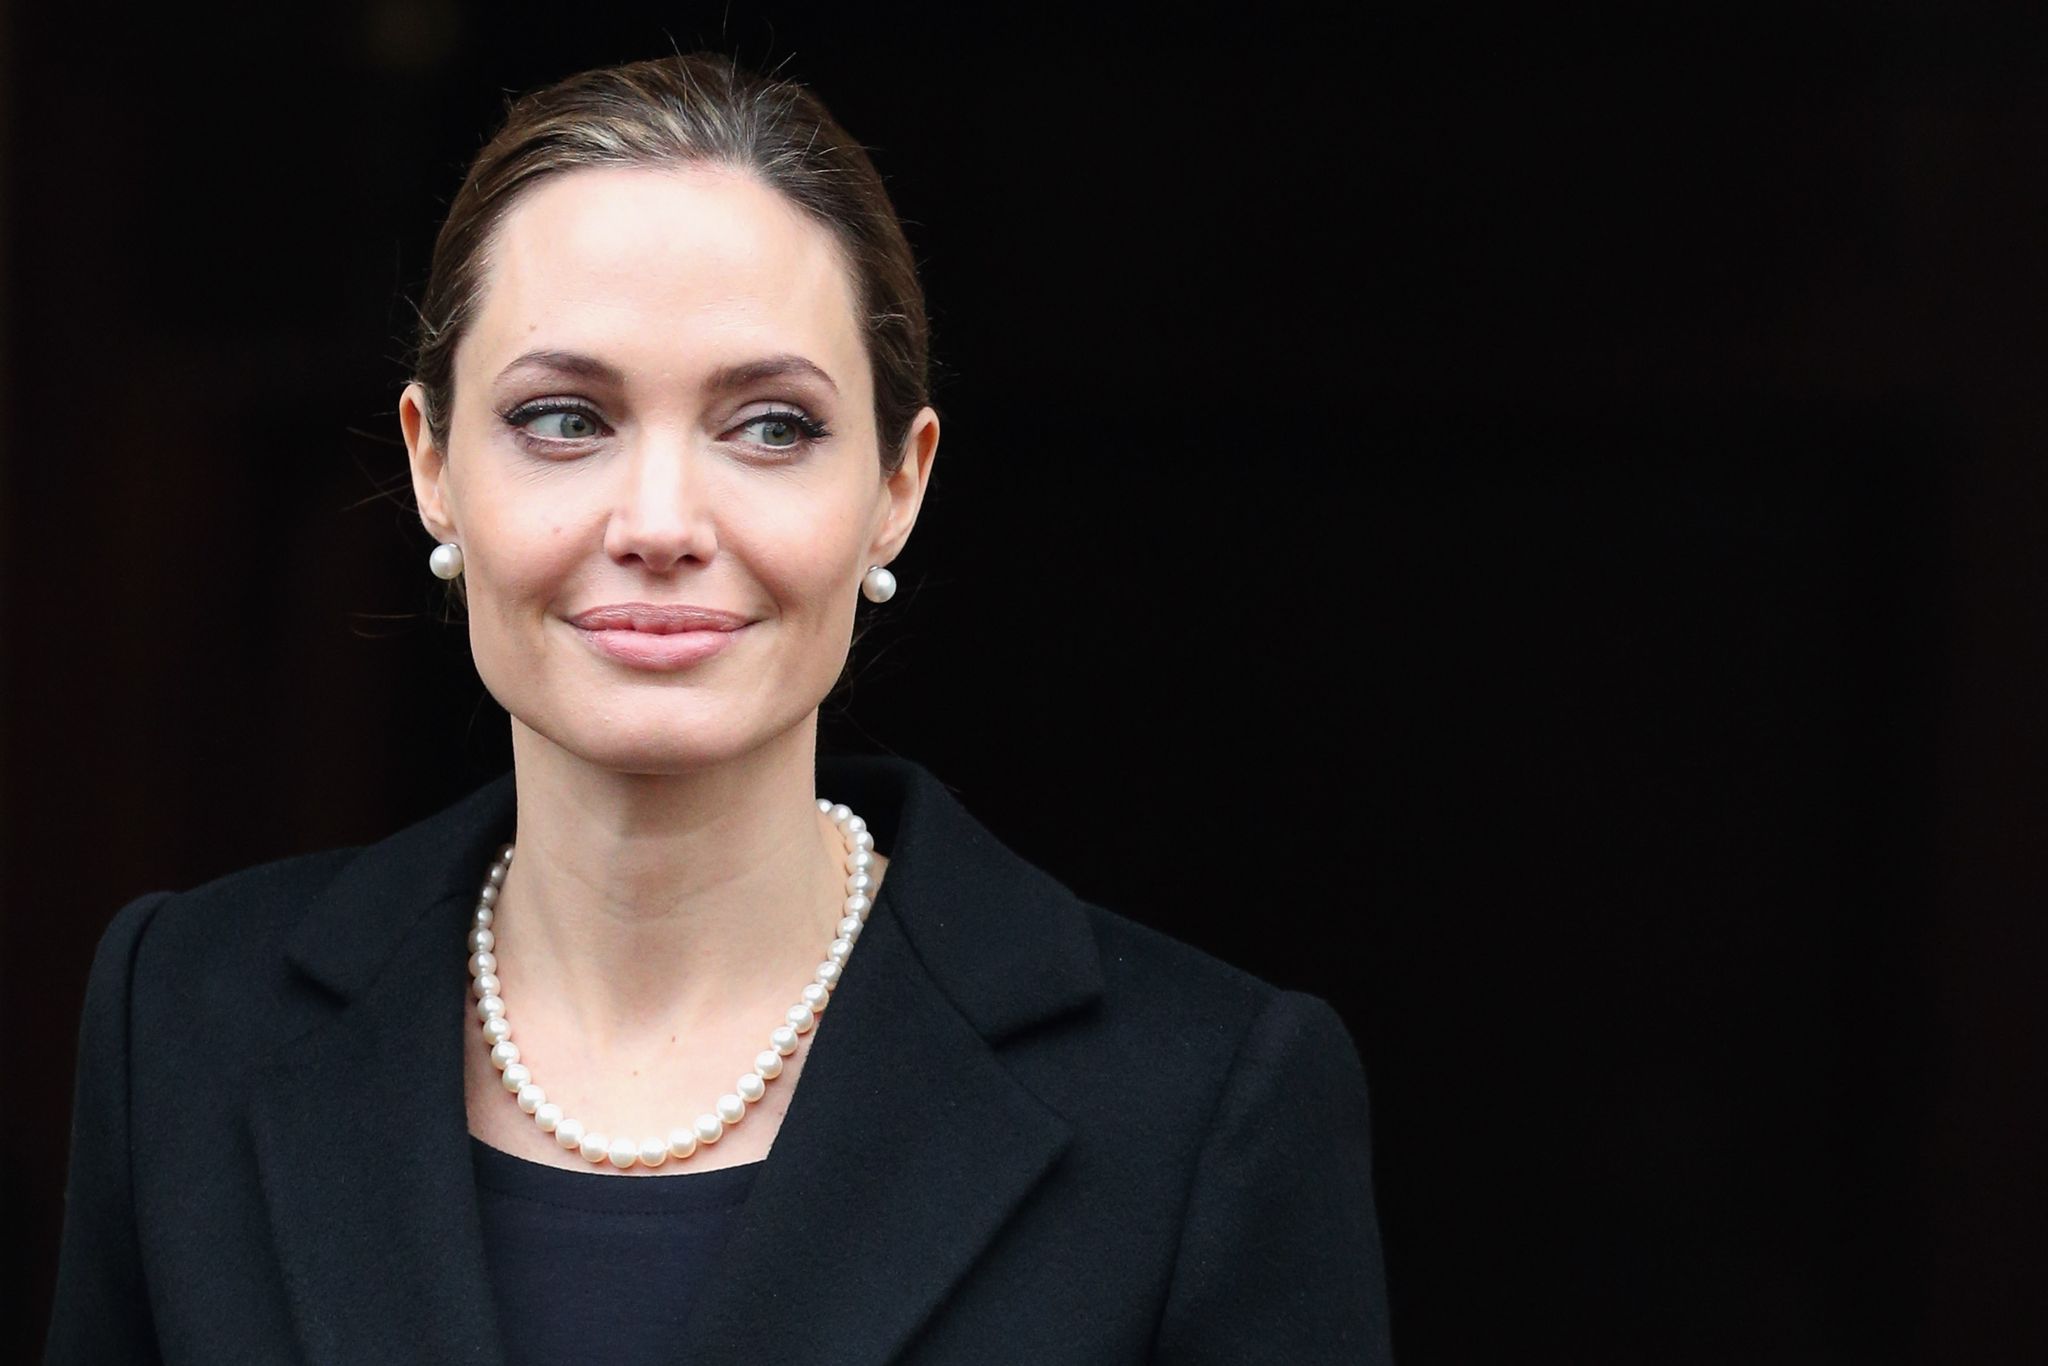 Angelina Jolie - Variety500 - Top 500 Entertainment Business Leaders